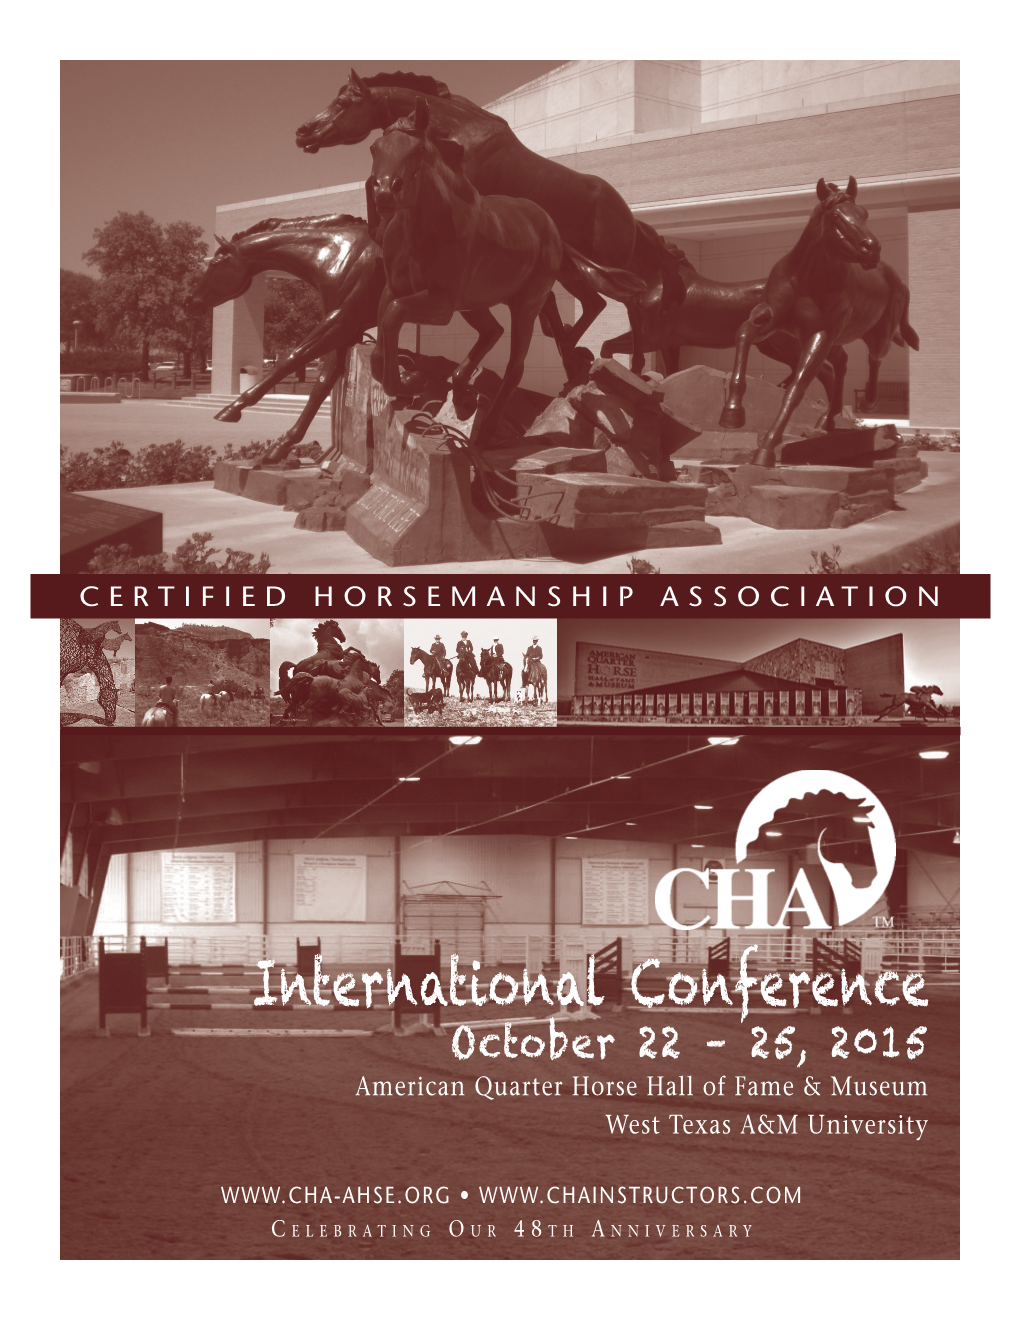 International Conference Americanoctober Quarter Horse 22 Hall Of– Fame25, & 2015Museum West Texas A&M University